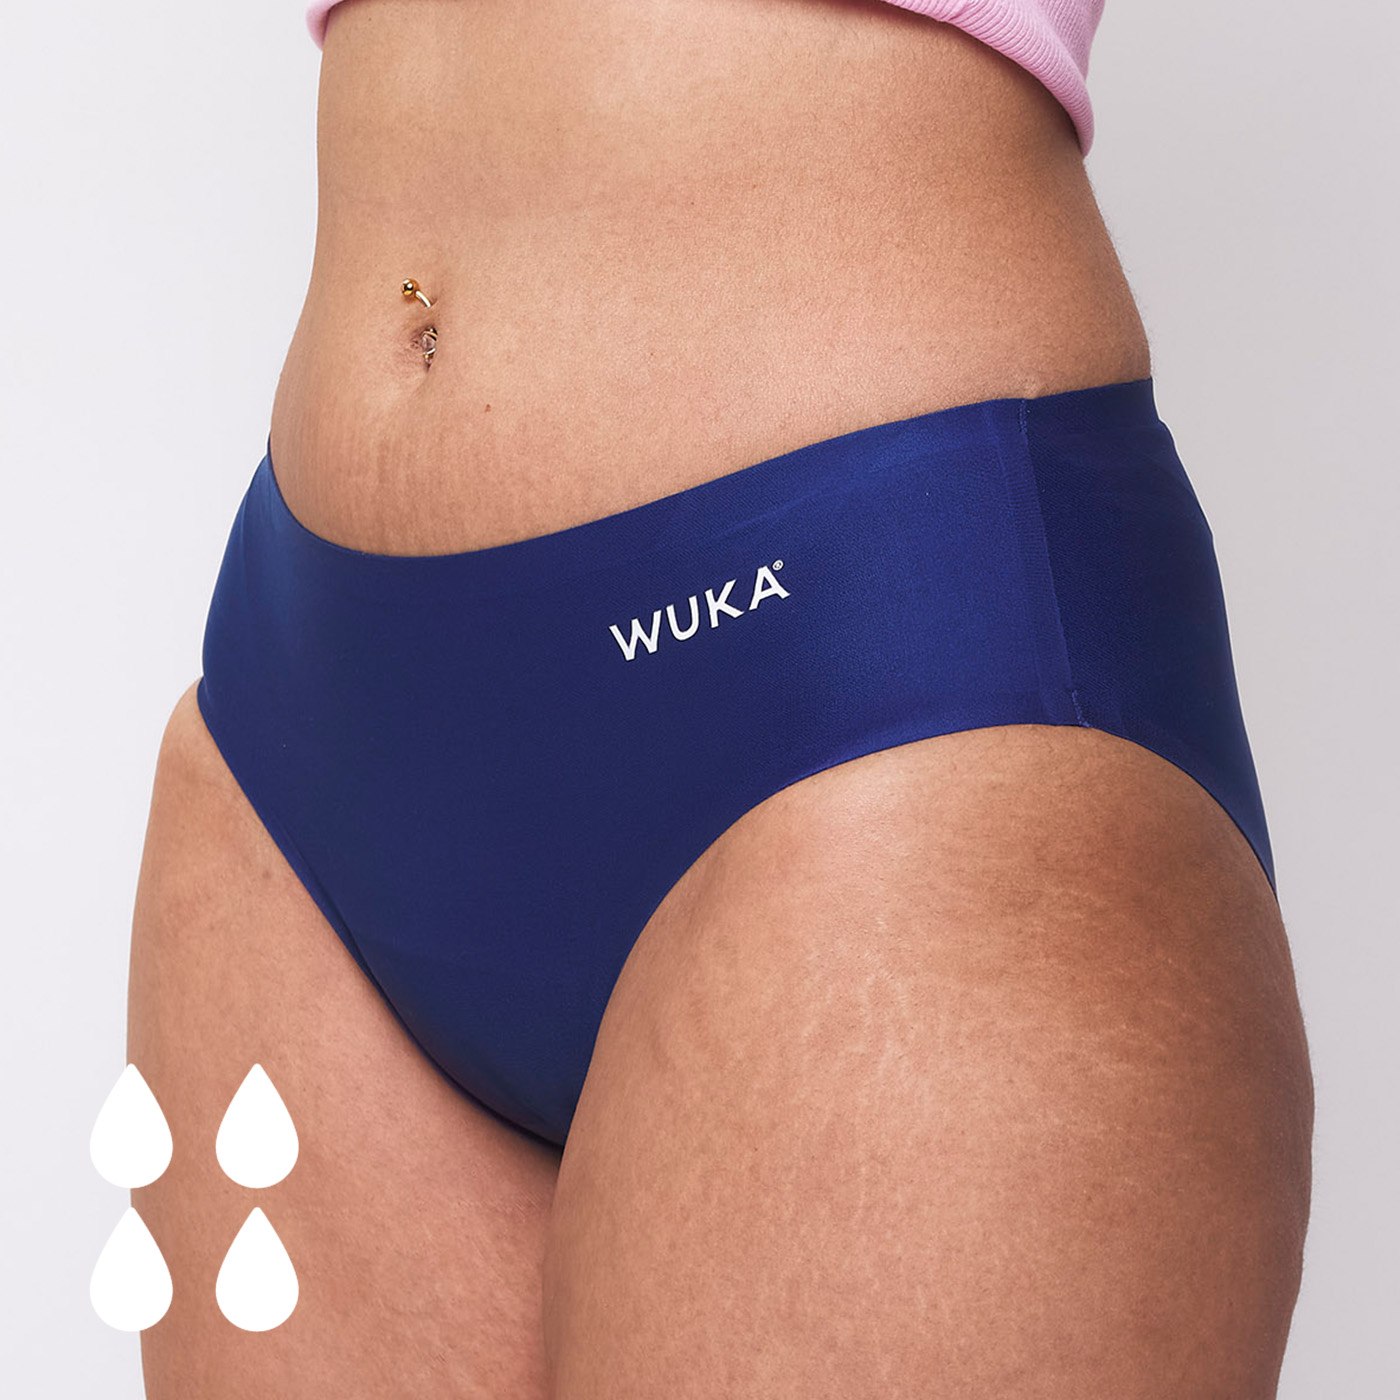 WUKA 'period proof' leggings hold three tampons' worth of flow